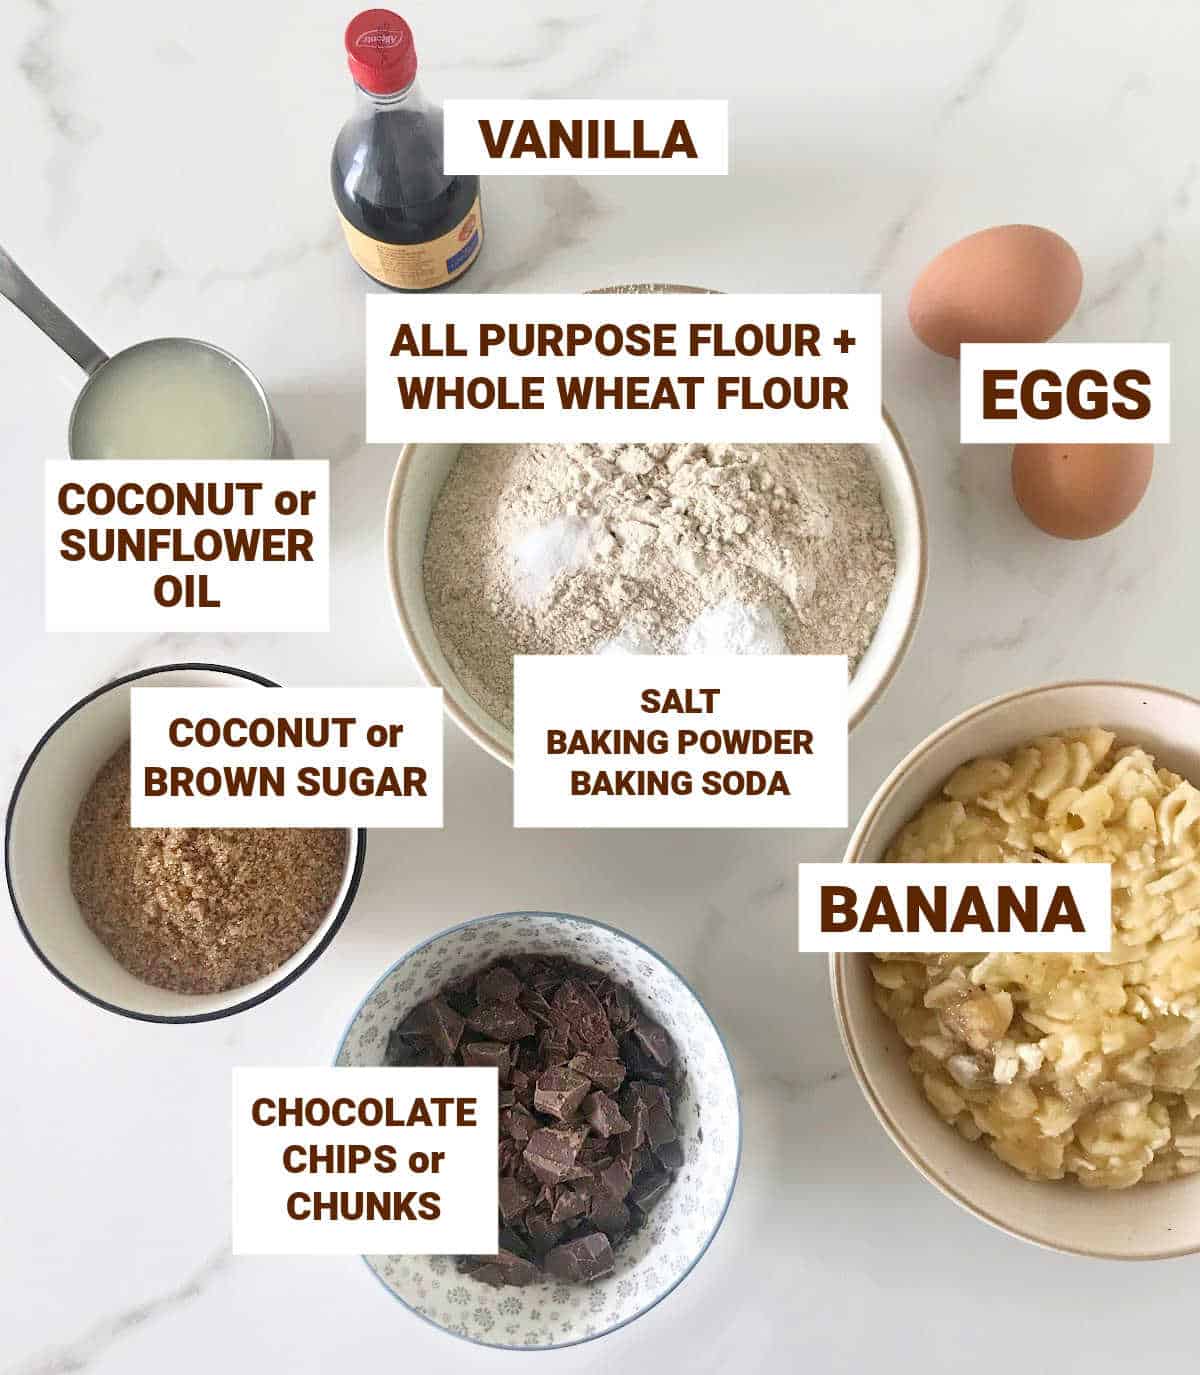 Banana chocolate bread ingredients in bowls on white surface, including eggs, vanilla and chocolate chunks.